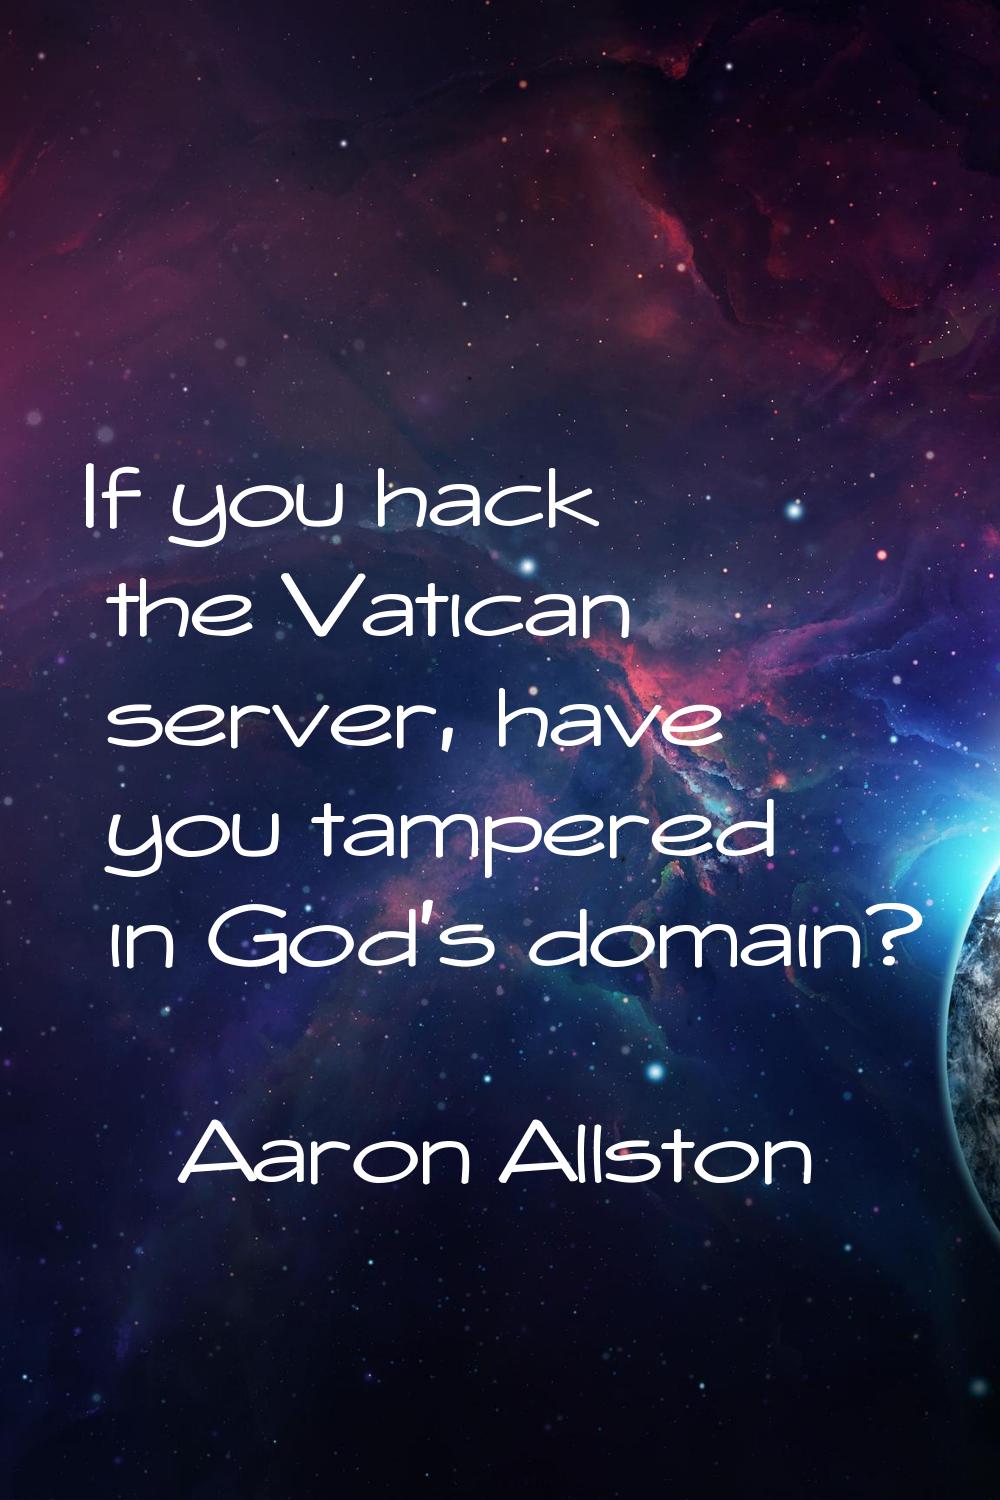 If you hack the Vatican server, have you tampered in God's domain?